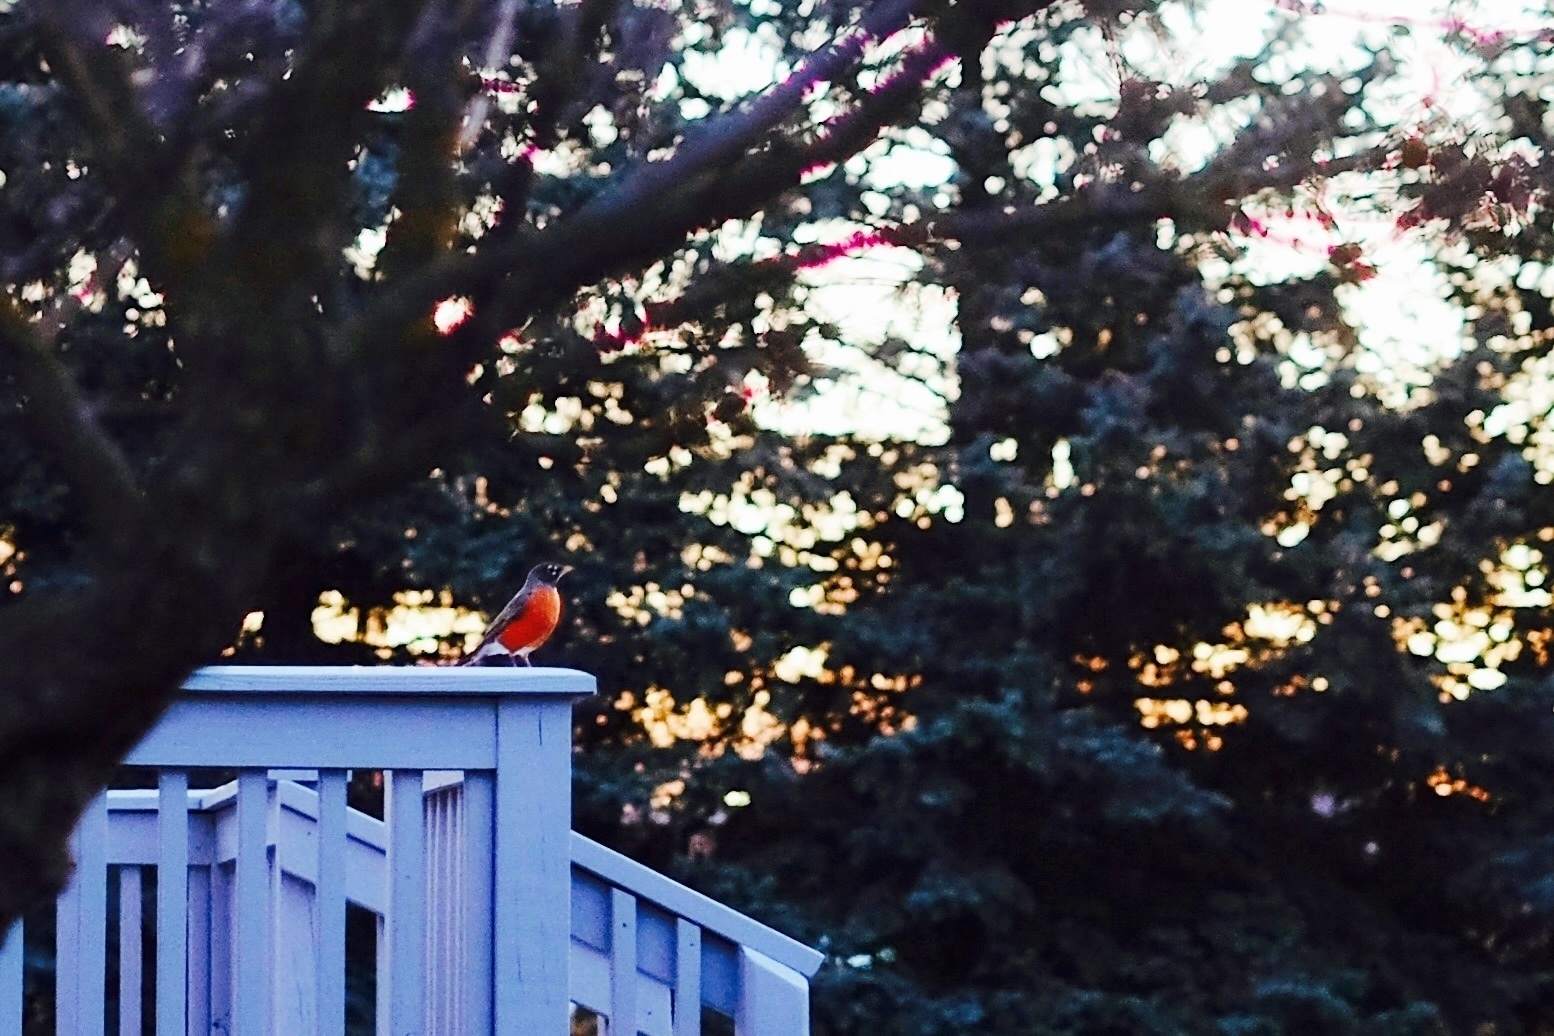 North American robin standing on banister at sunset